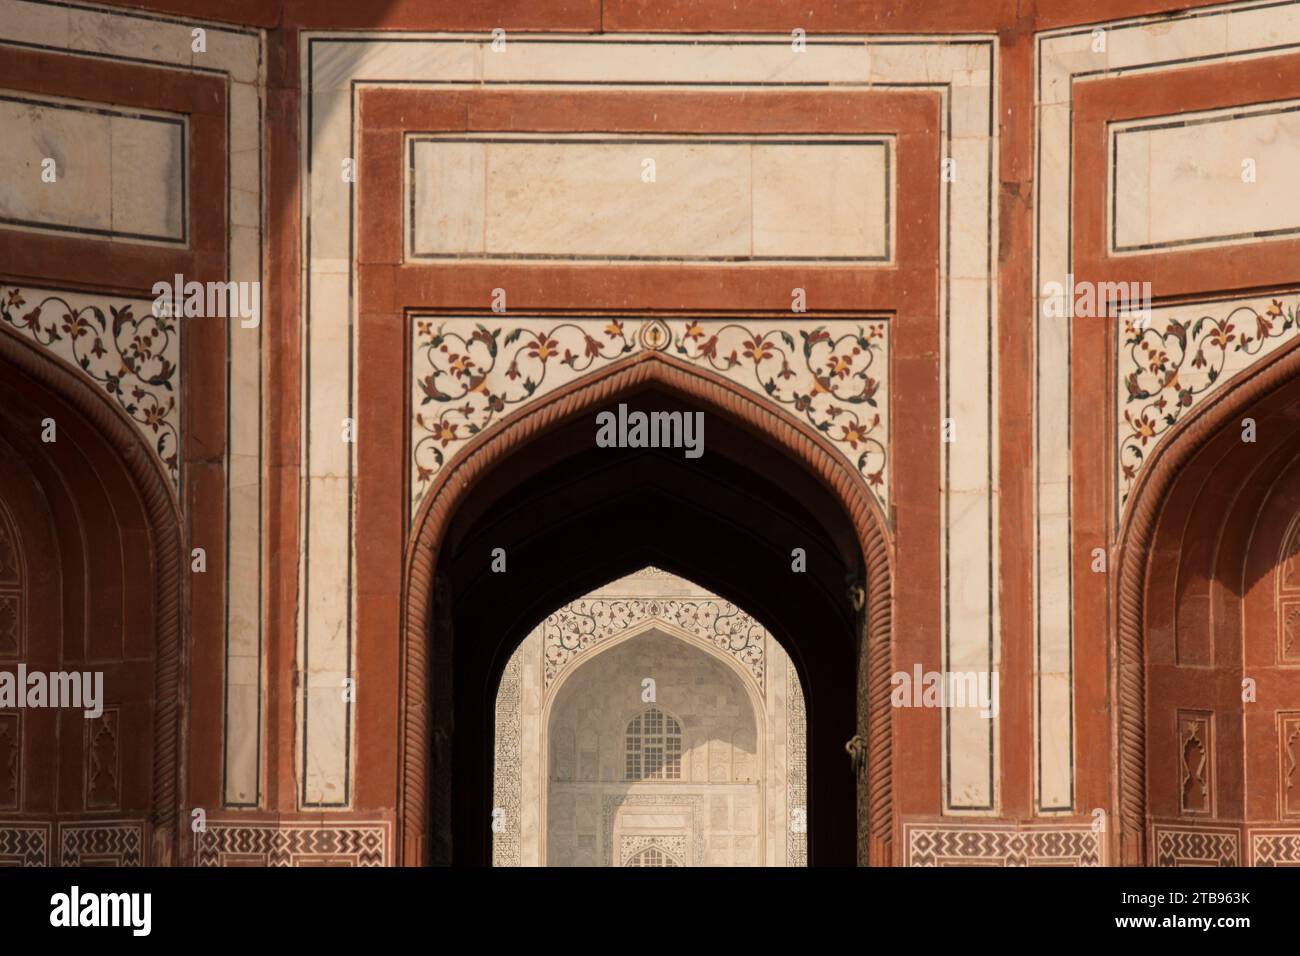 Architectural detail in the Agra Fort; Agra, India Stock Photo